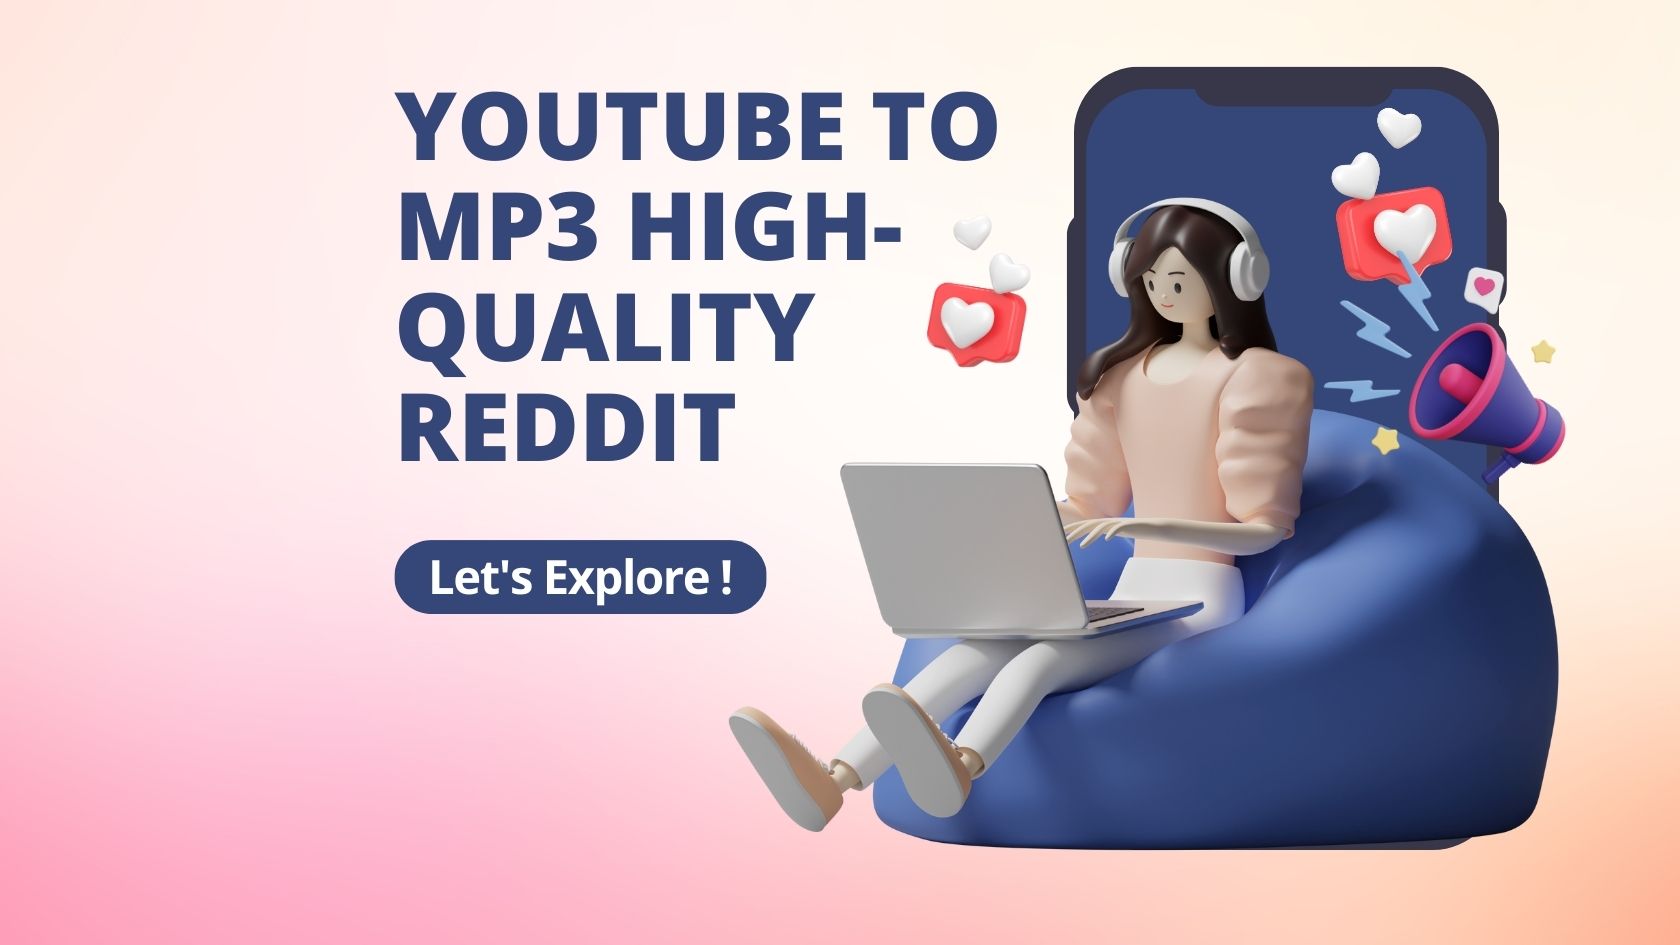 How to YouTube to MP3 High-Quality Reddit